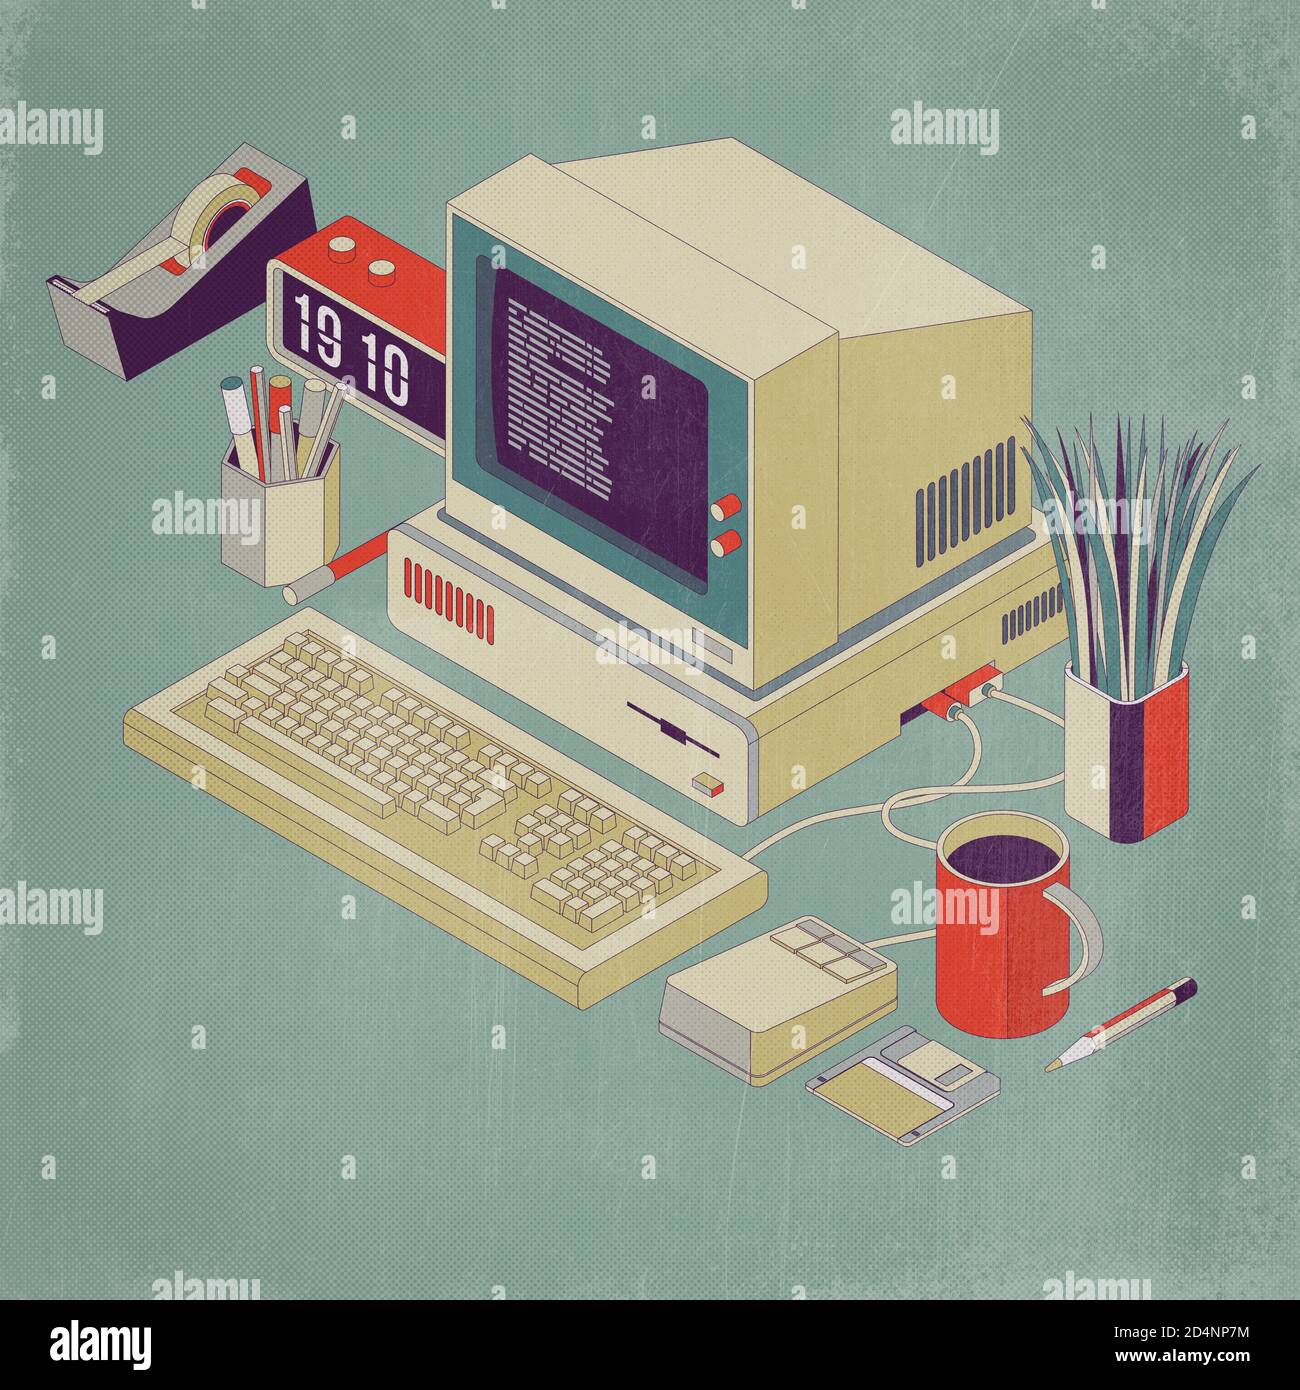 Old outdated desktop PC with mouse, keyboard and floppy disk, isometric 3D illustration Stock Photo